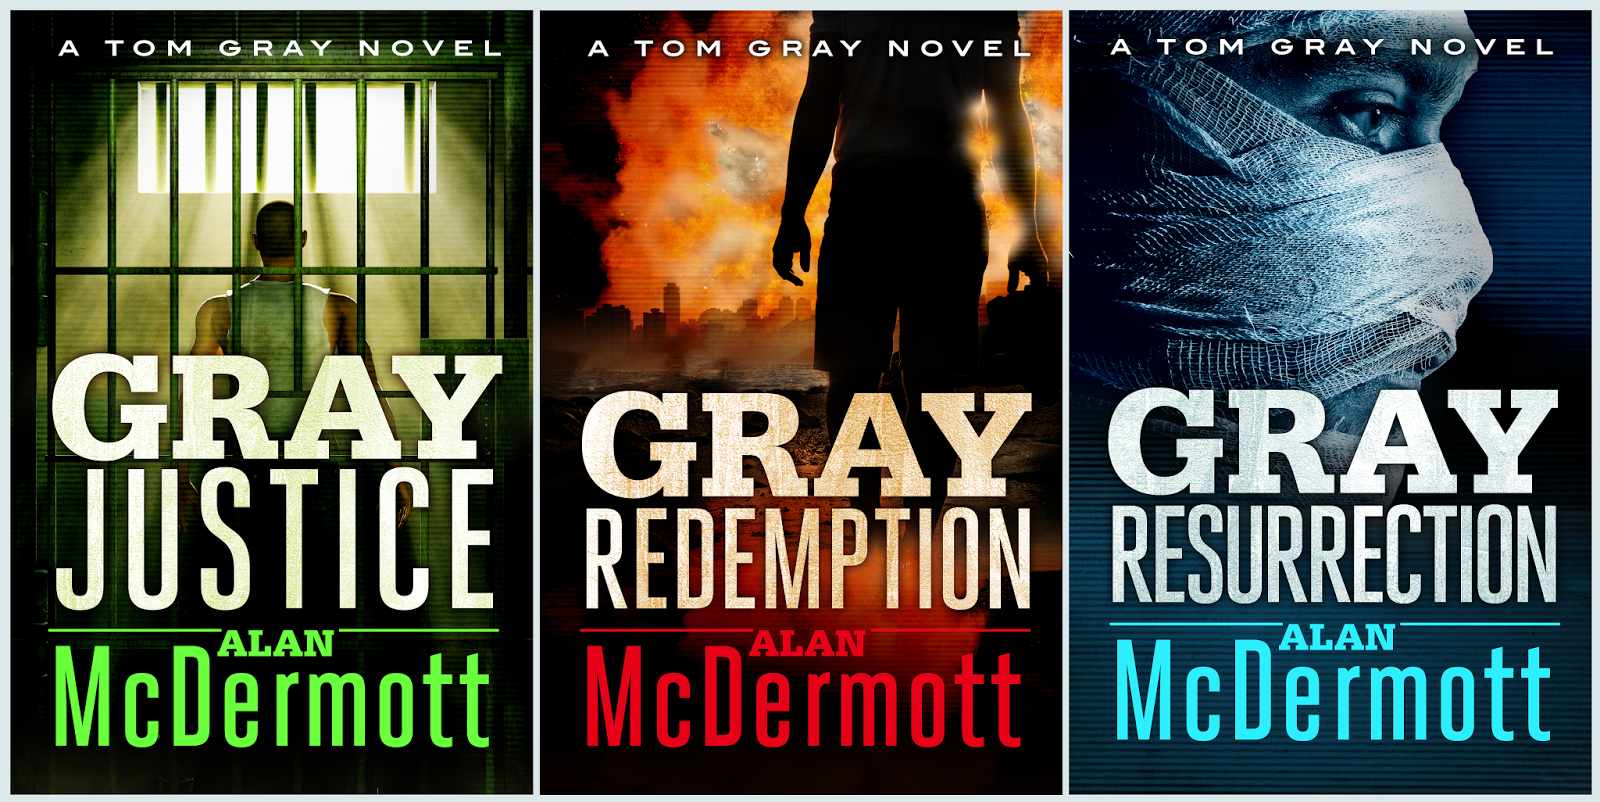 Great Books Great Deals New Releases Pre Order Book 4 In The Bestselling Tom Gray Series